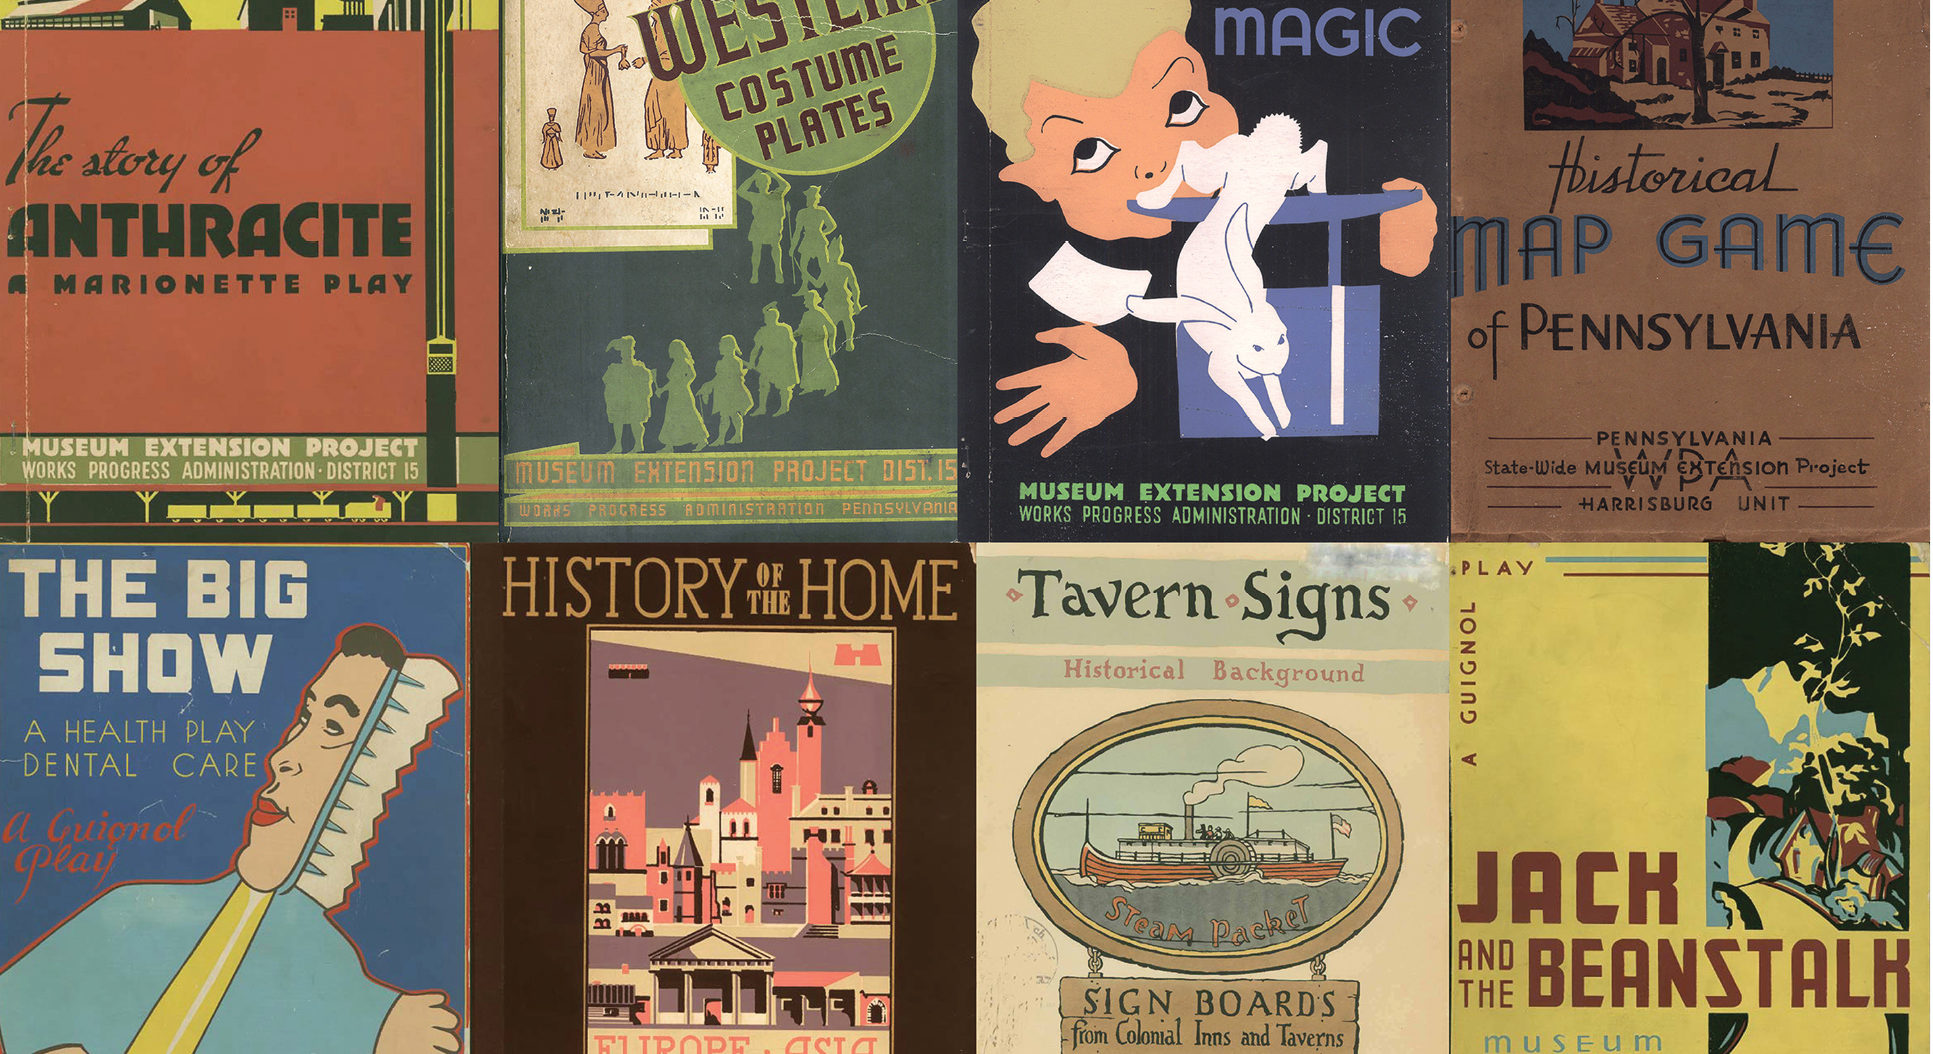 A collage of historic journal images from the Works Progress Administration Museum Extension Project, including titles “ western costume plates,” “a handbook of magic,” “history of the home,” and more.